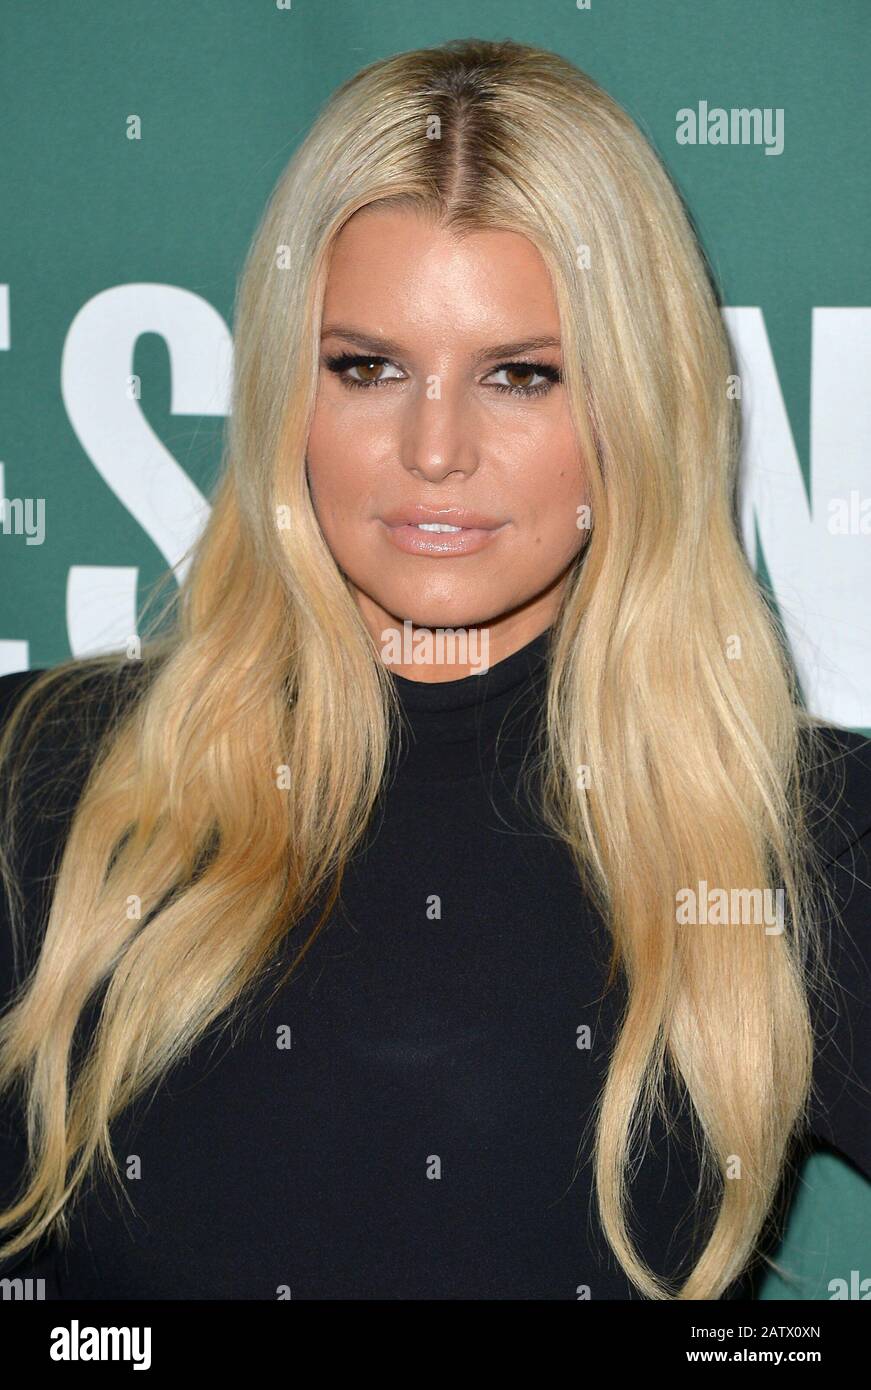 New York, NY, USA. 4th Feb, 2020. Jessica Simpson at in-store appearance for Jessica Simpson 'Open Book' Booksigning, Barnes & Noble Union Square, New York, NY February 4, 2020. Credit: Kristin Callahan/Everett Collection/Alamy Live News Stock Photo